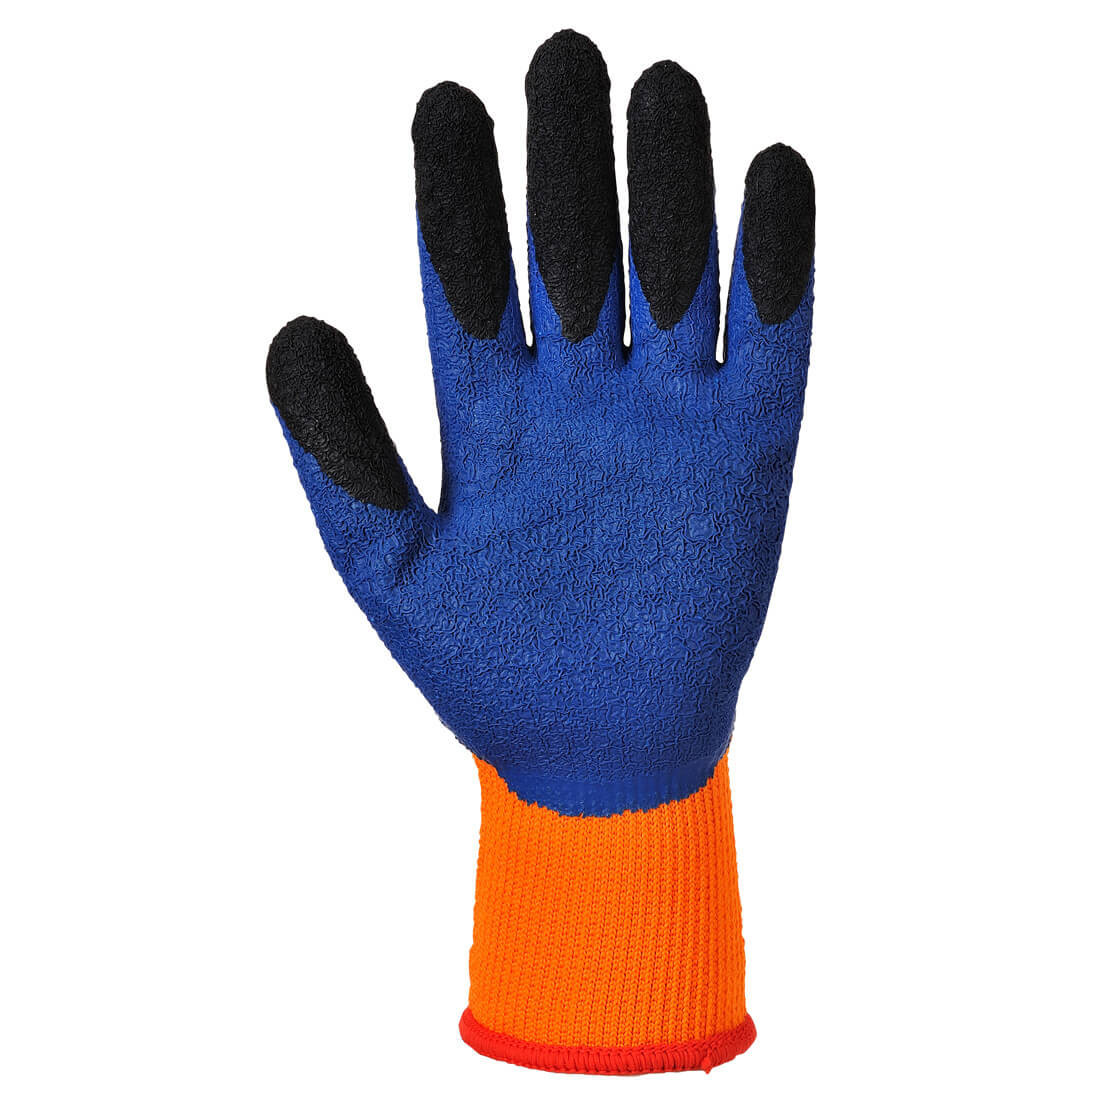 Glove Duo-Therm - Personal protection